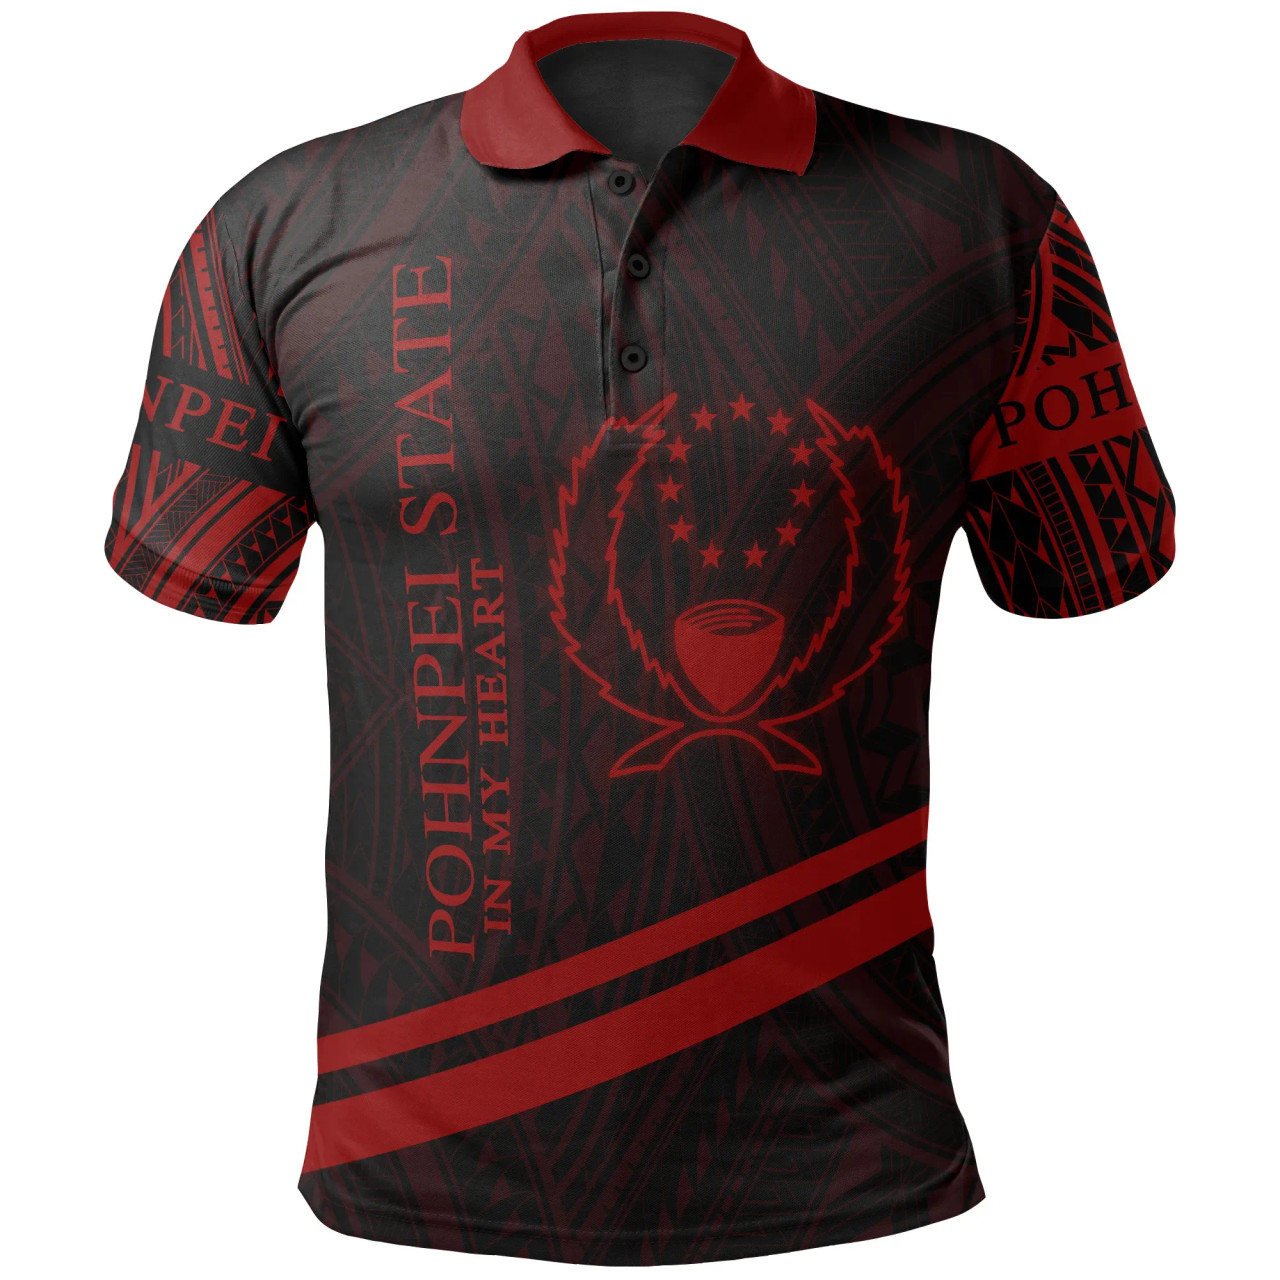 Pohnpei State Polo Shirt - In My Heart Style Red Polynesian Patterns